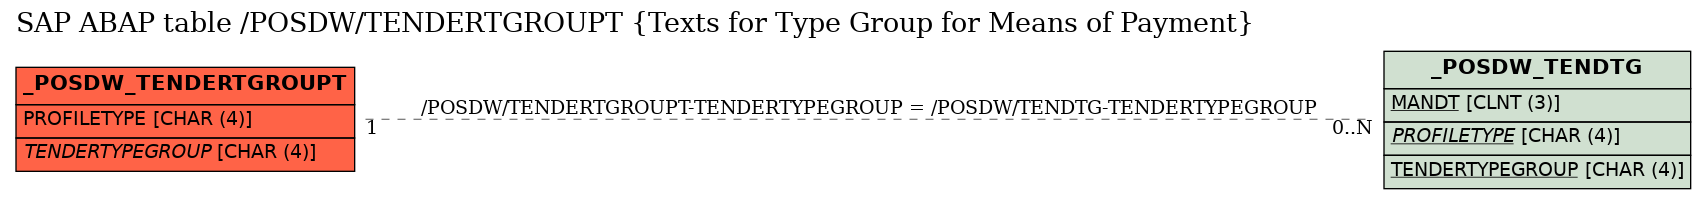 E-R Diagram for table /POSDW/TENDERTGROUPT (Texts for Type Group for Means of Payment)